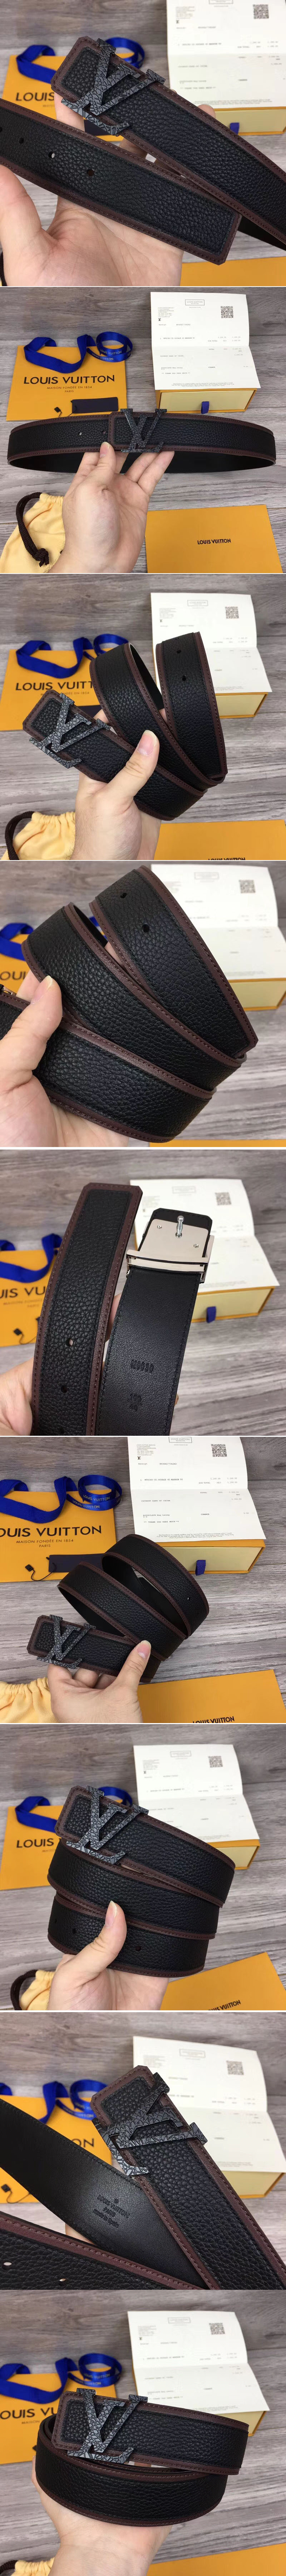 Replica Louis Vuitton M0030 LV Covered 40mm Belt Taurillon Leather Black